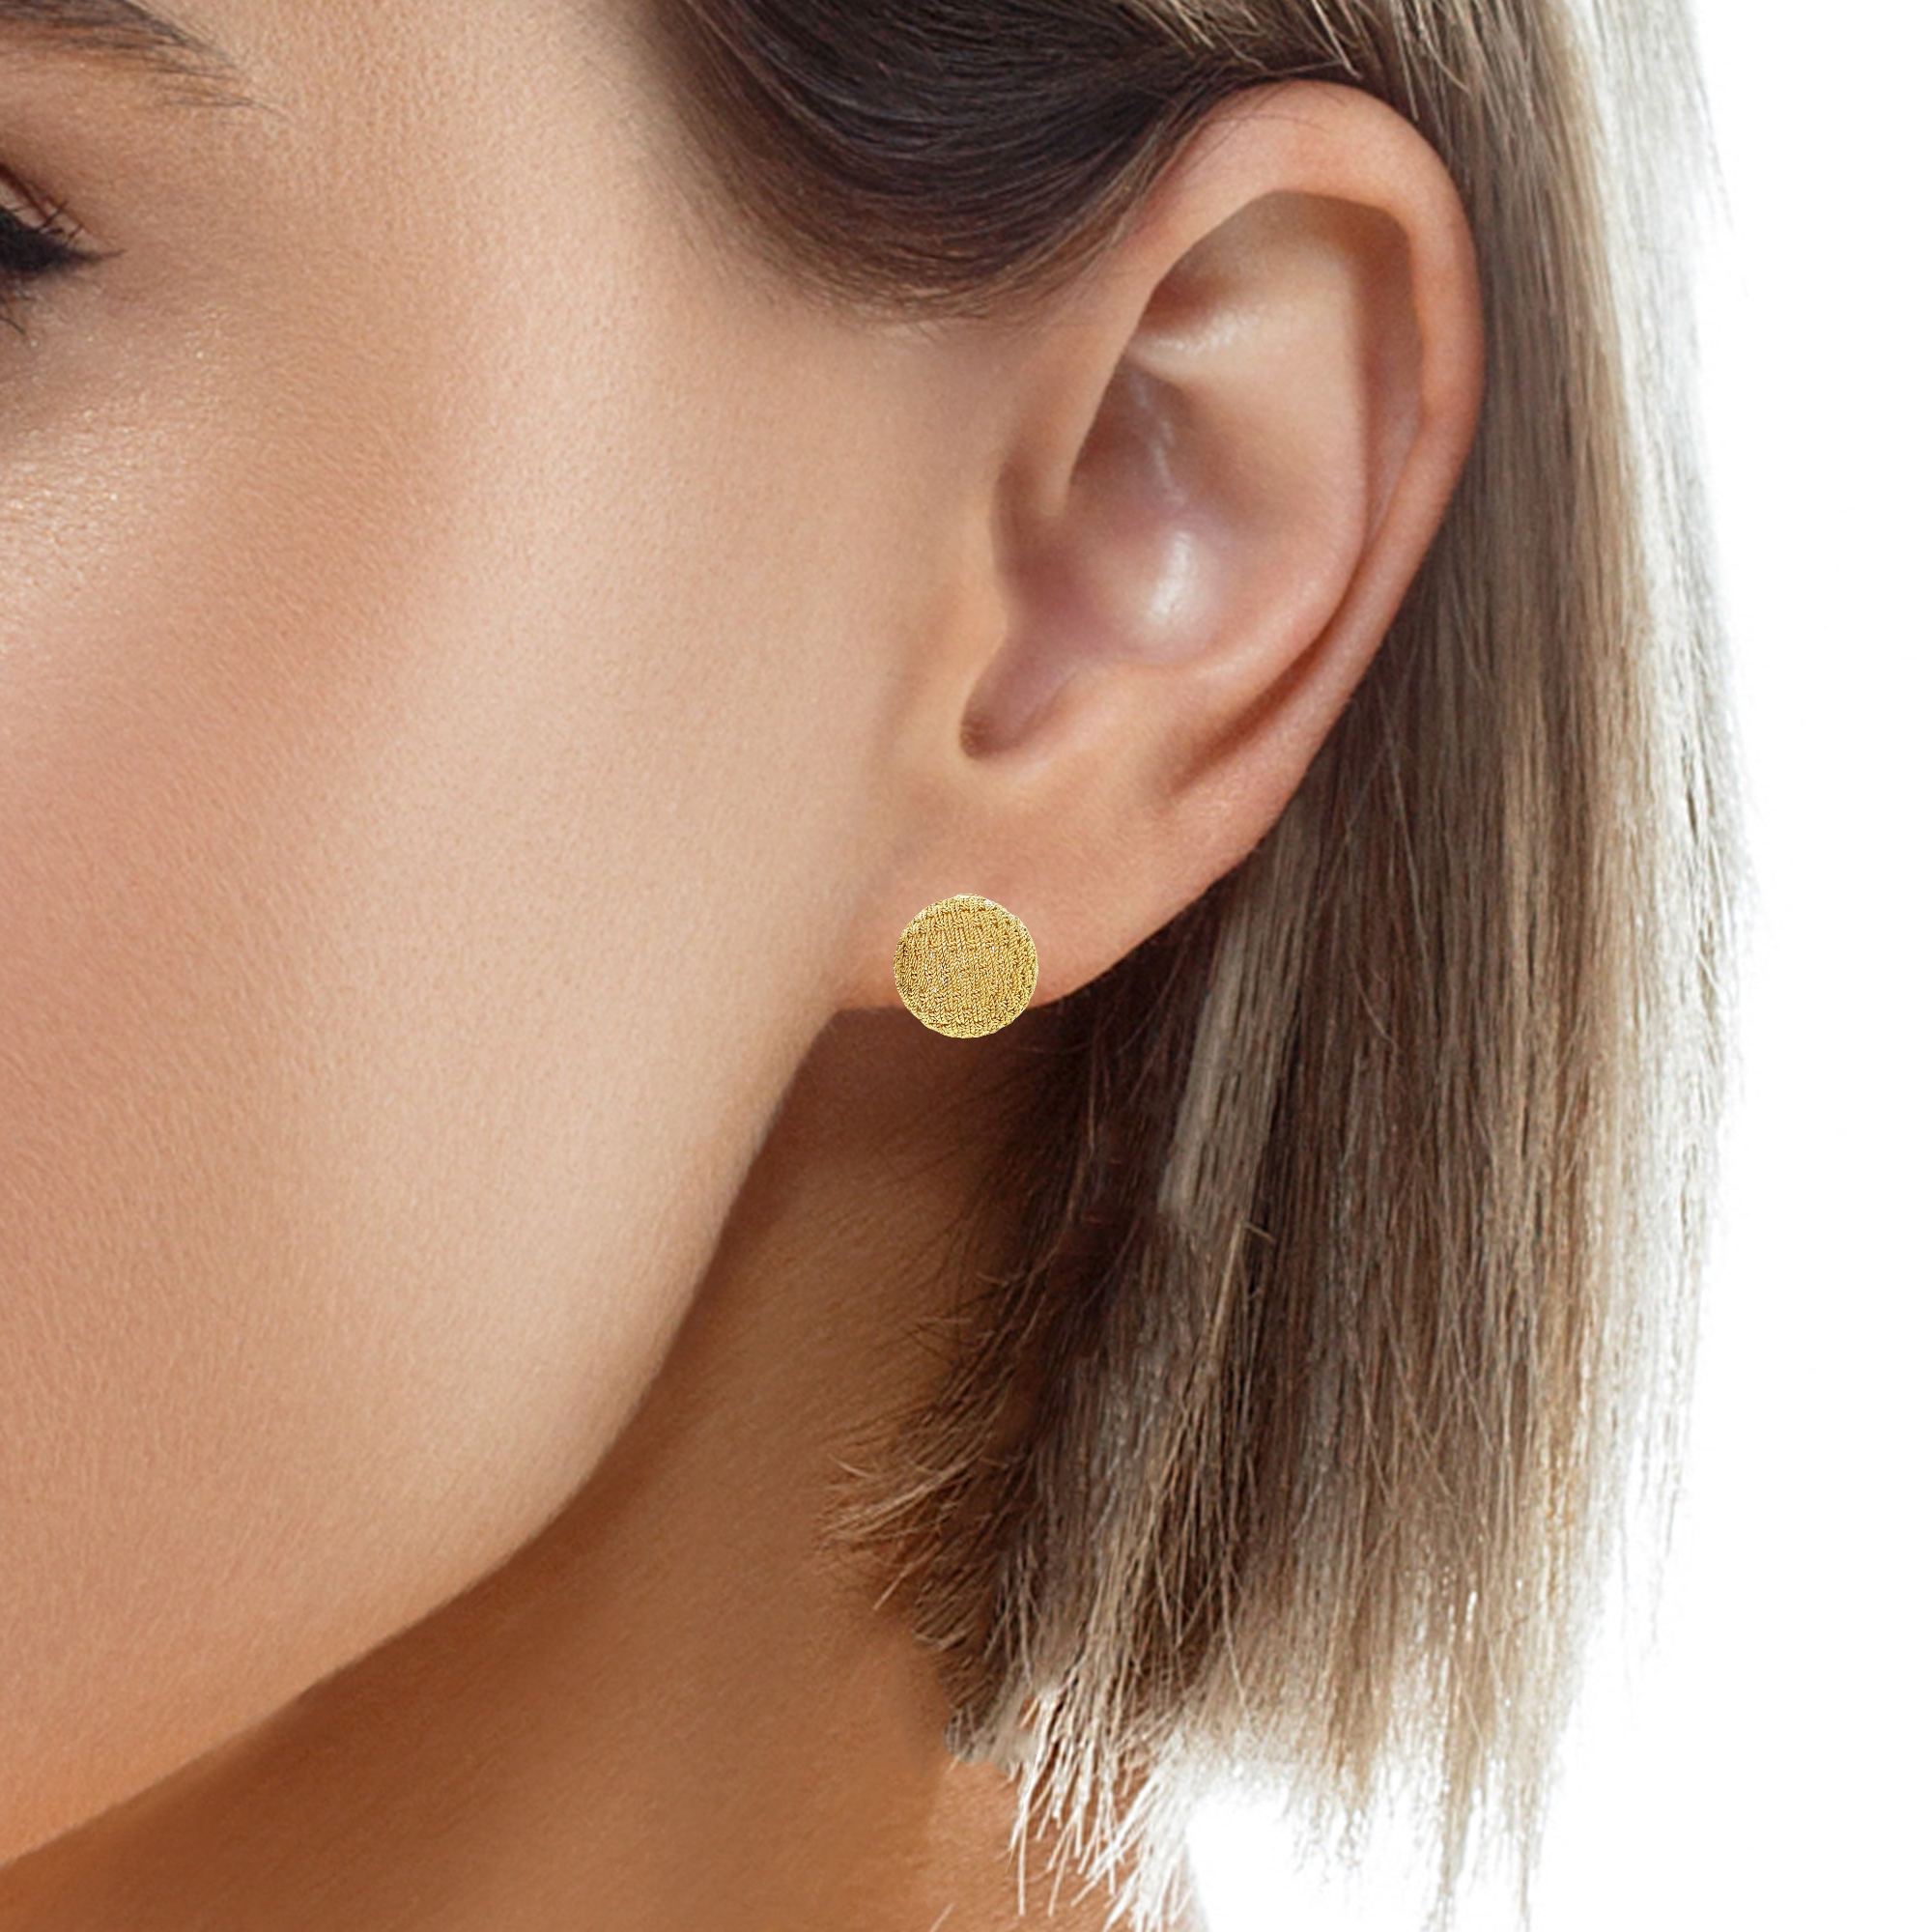 Experience the beauty and luxury of 18K gold earrings with the perfect combination of a timeless woven design and a striking matte finish. Make a statement with secure friction backs that stay put all day long. 12.00 mm